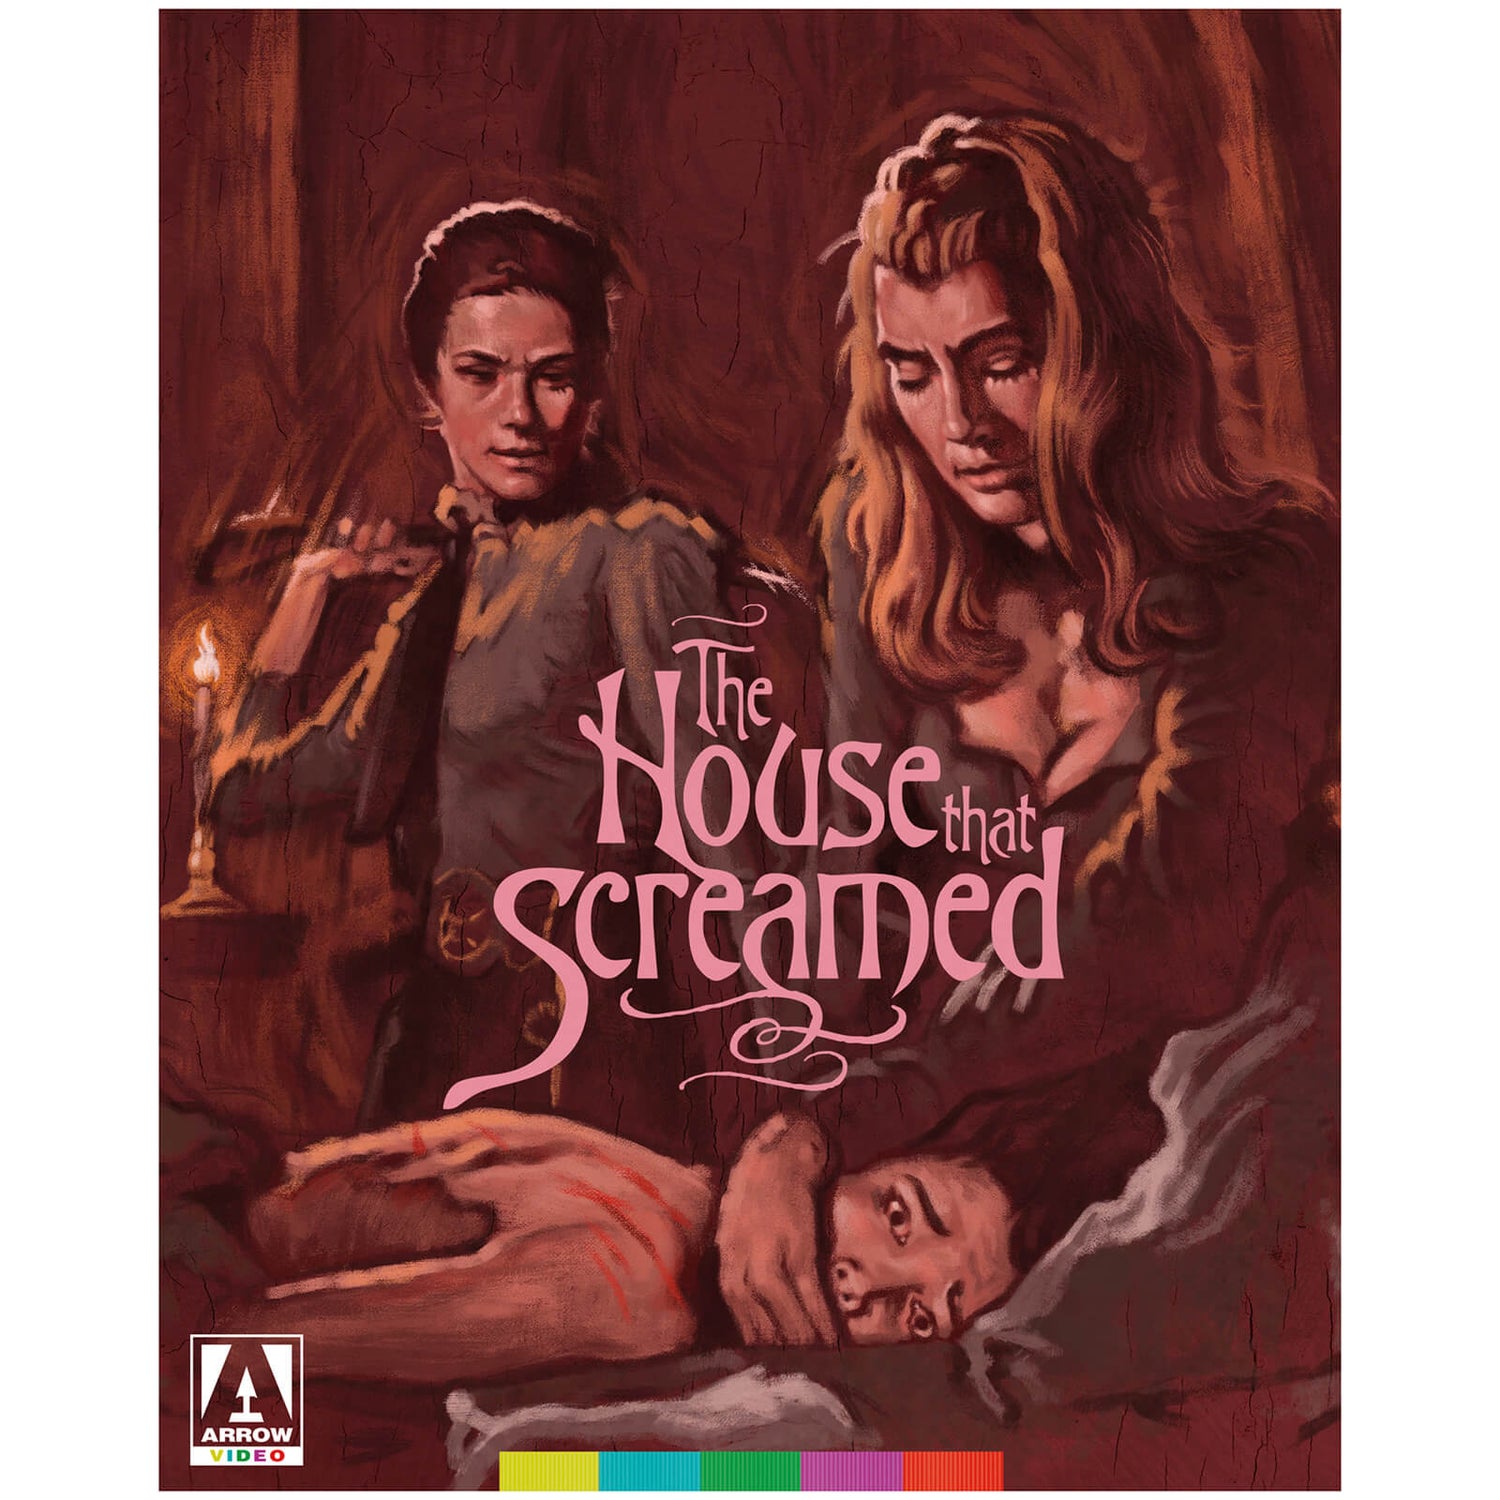 The House That Screamed Blu-ray